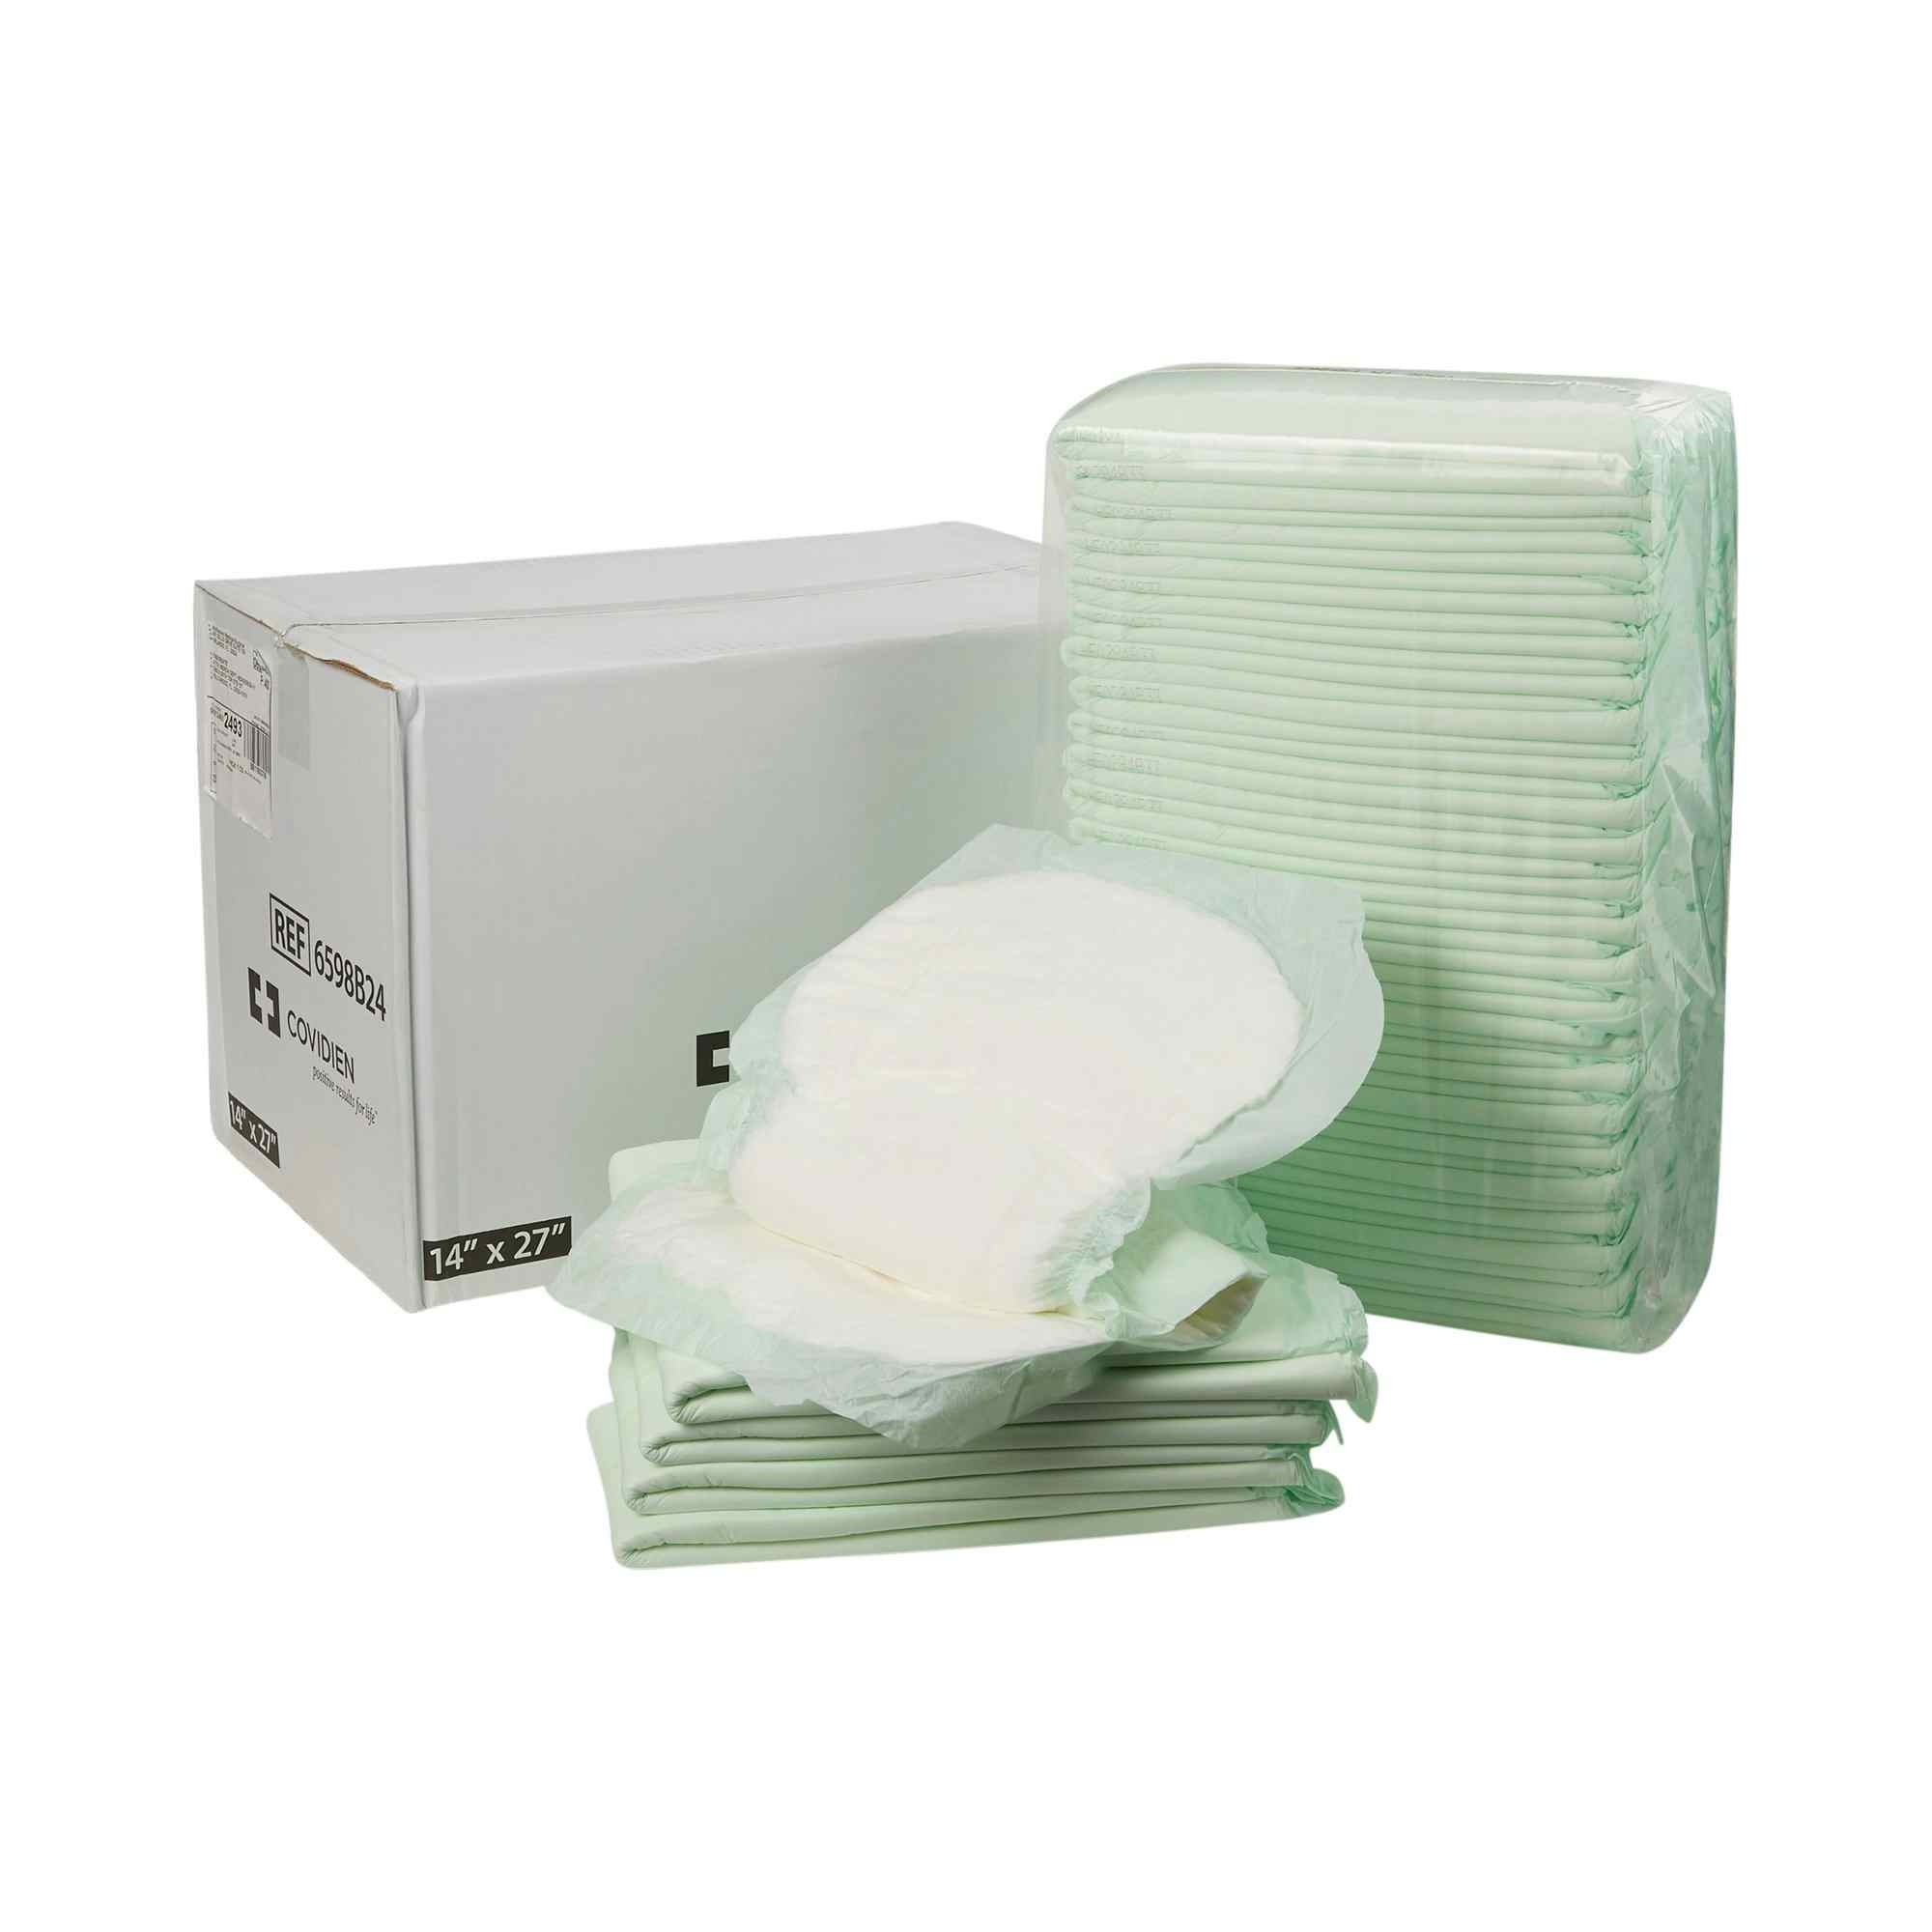 Wings Adult Unisex Disposable Incontinence Liner, Moderate Absorbency , 6598B24-, White - 14 X 27" - Pack of 24